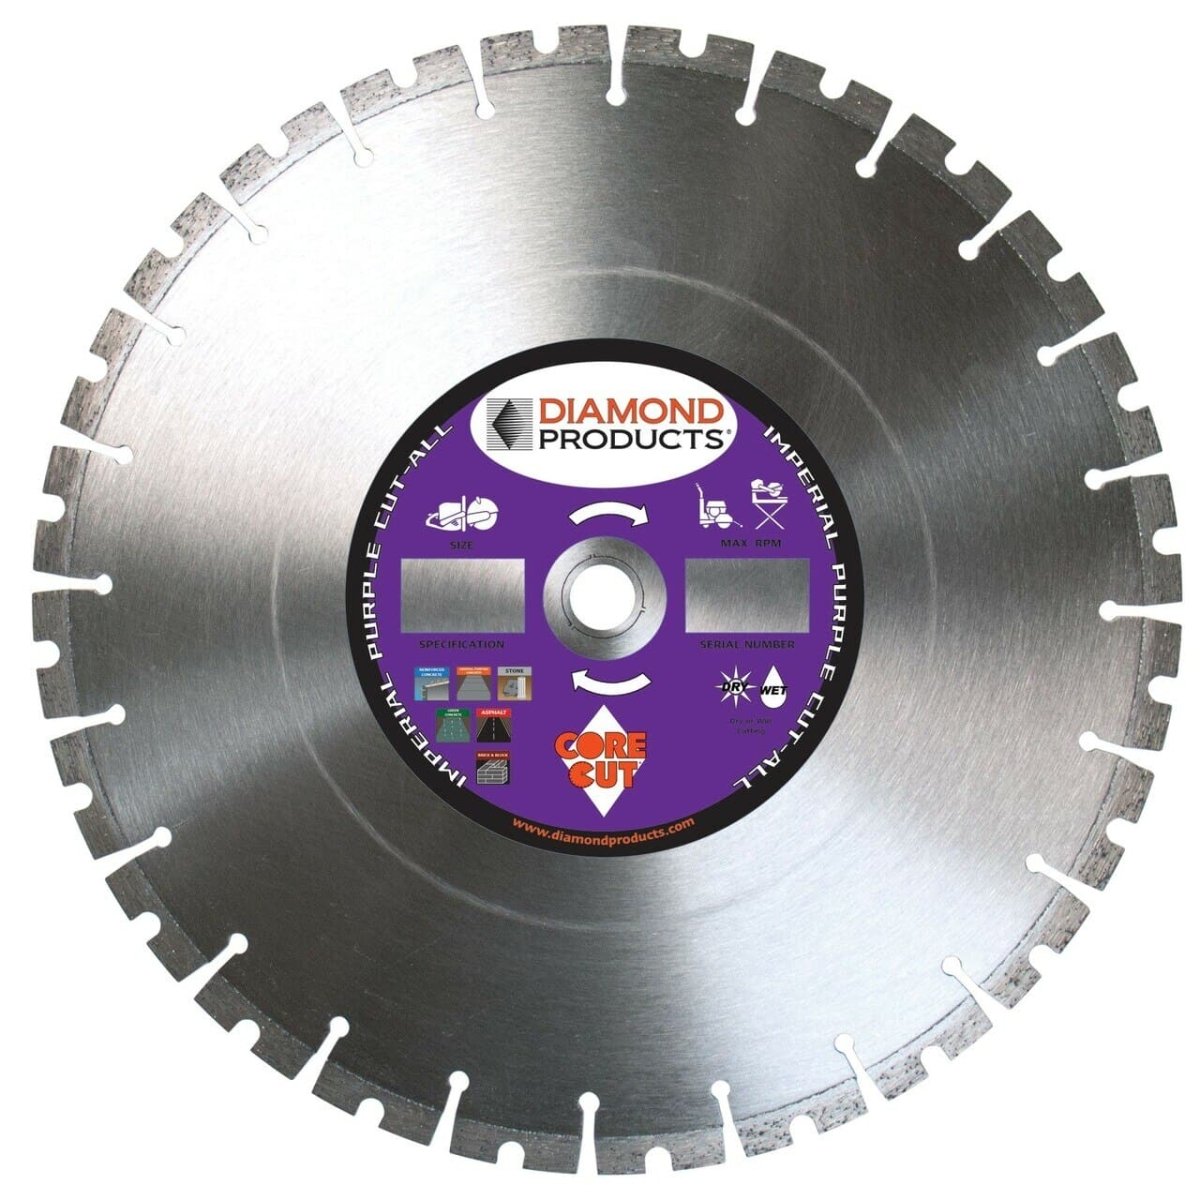 Cut-ALL Multi-Purpose Imperial Specialty Diamond Blades - Diamond Products